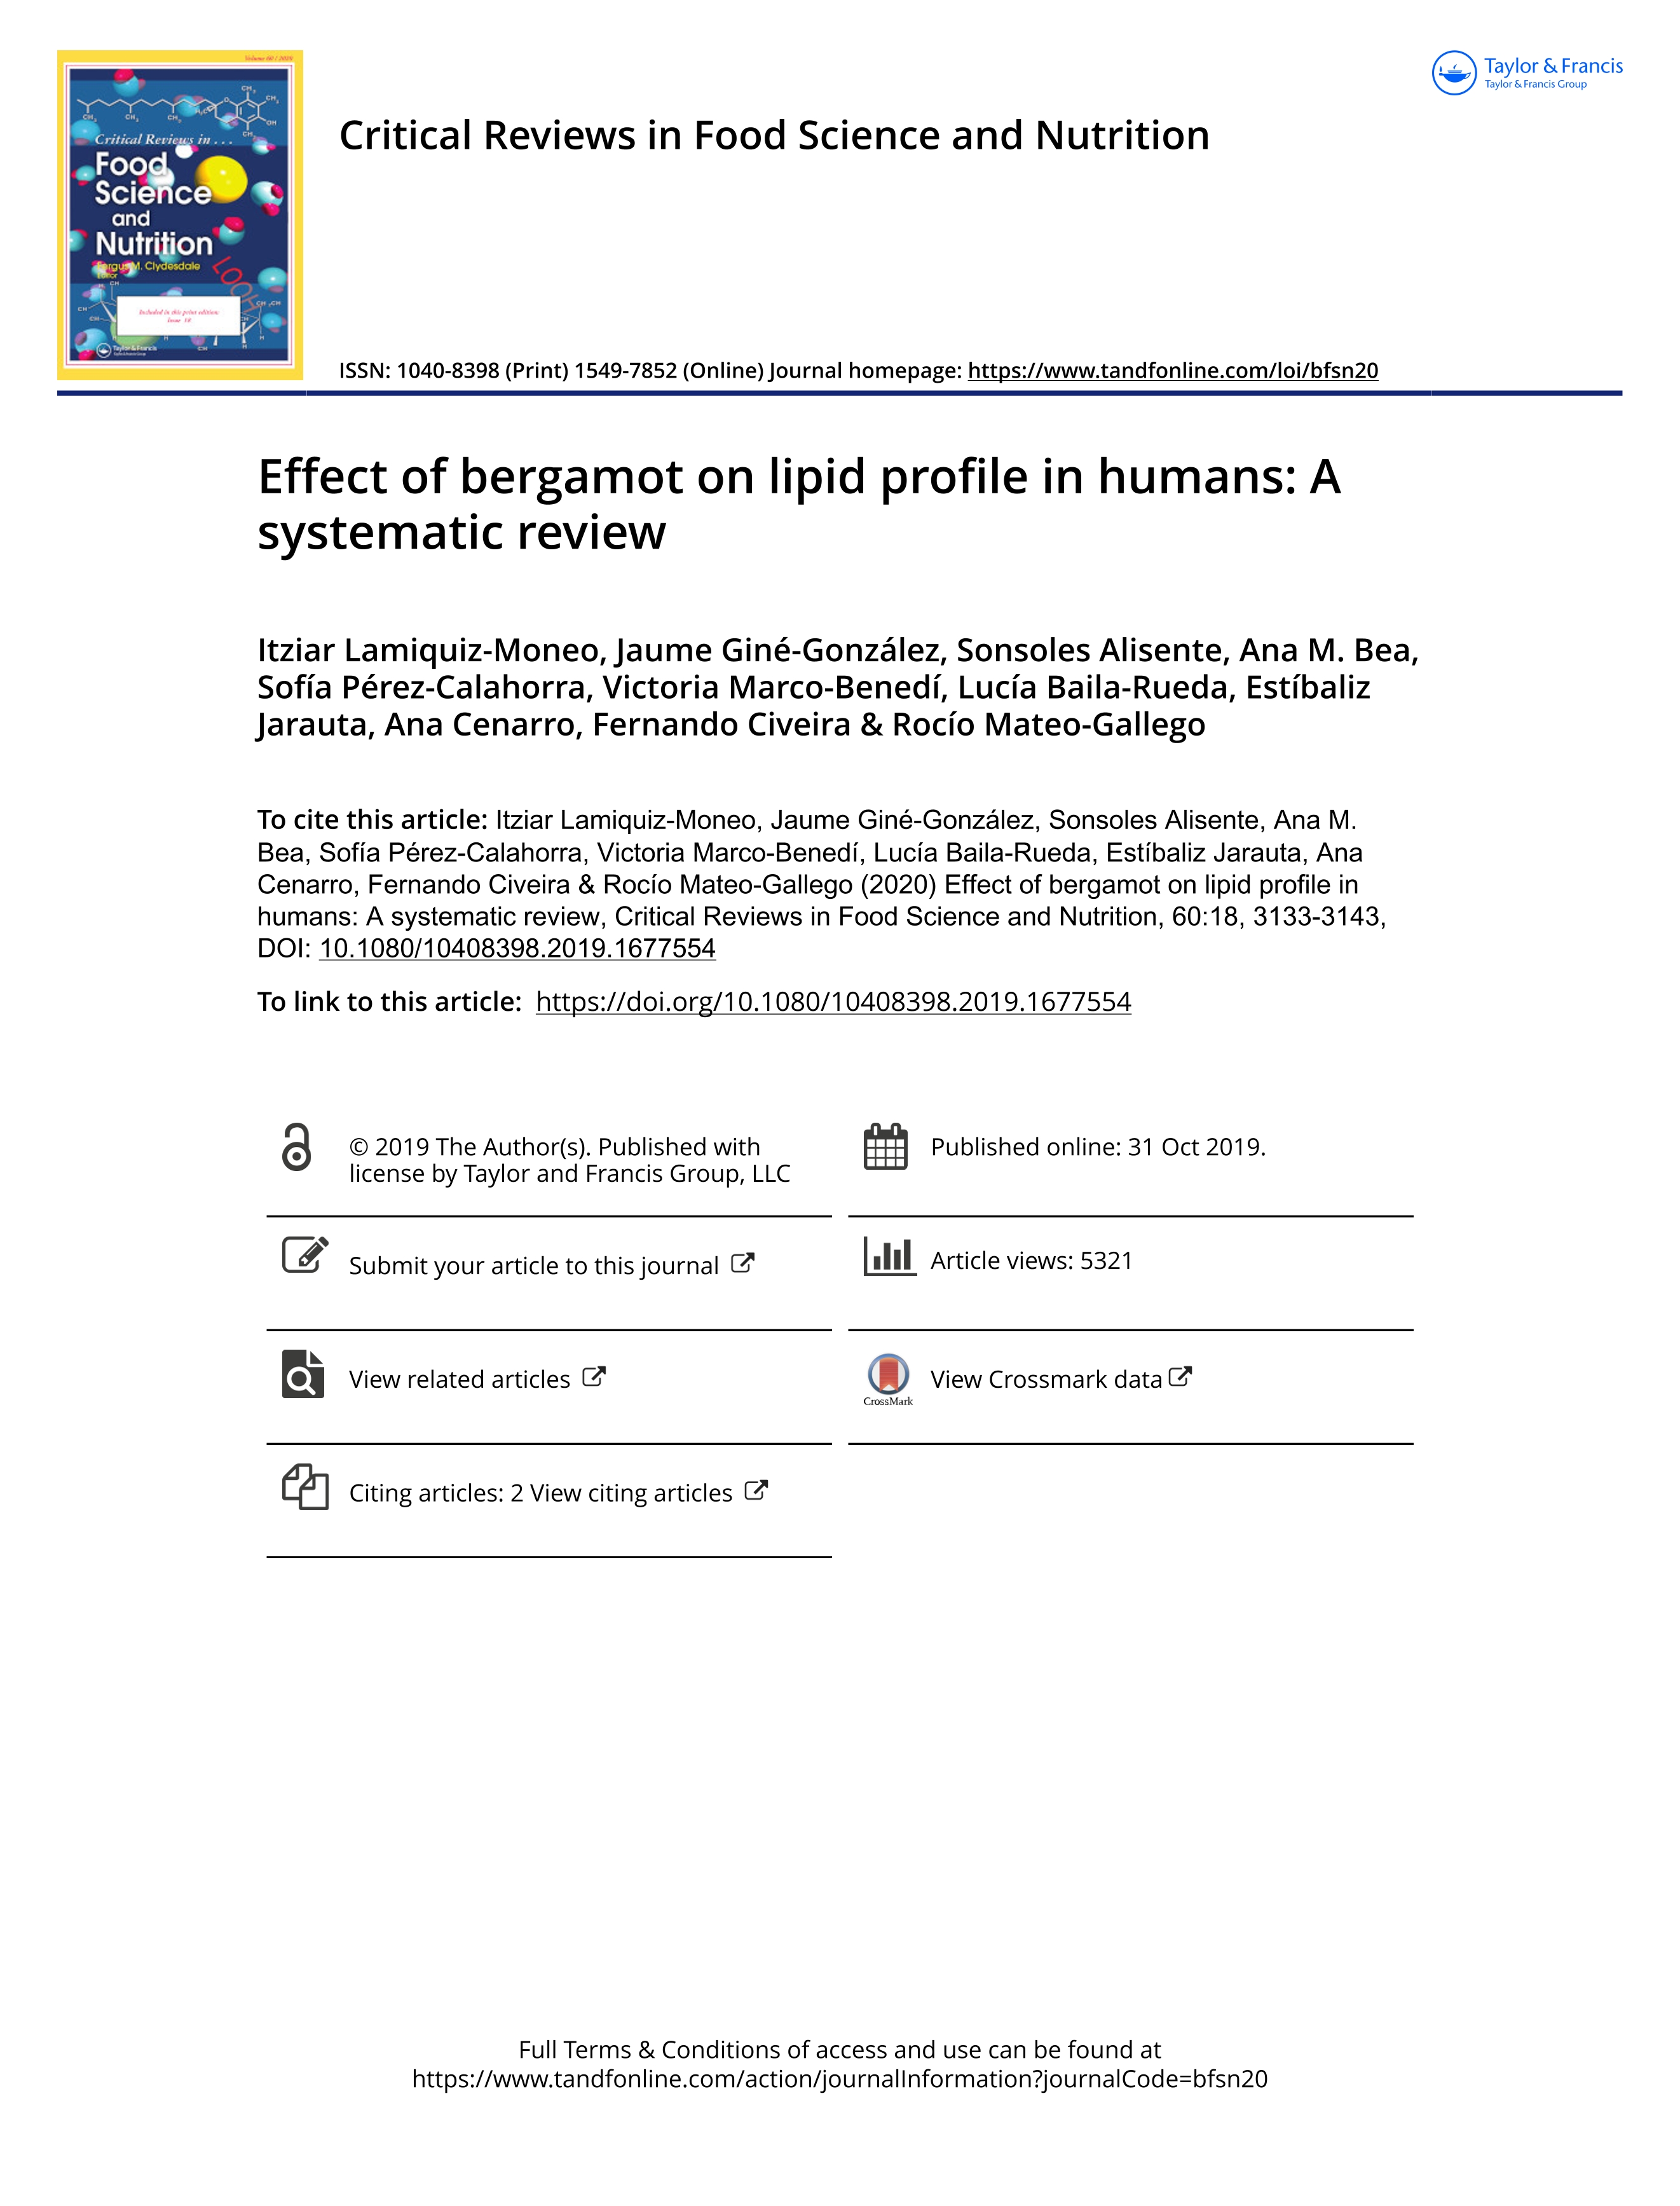 Effect of bergamot on lipid profile in humans: A systematic review